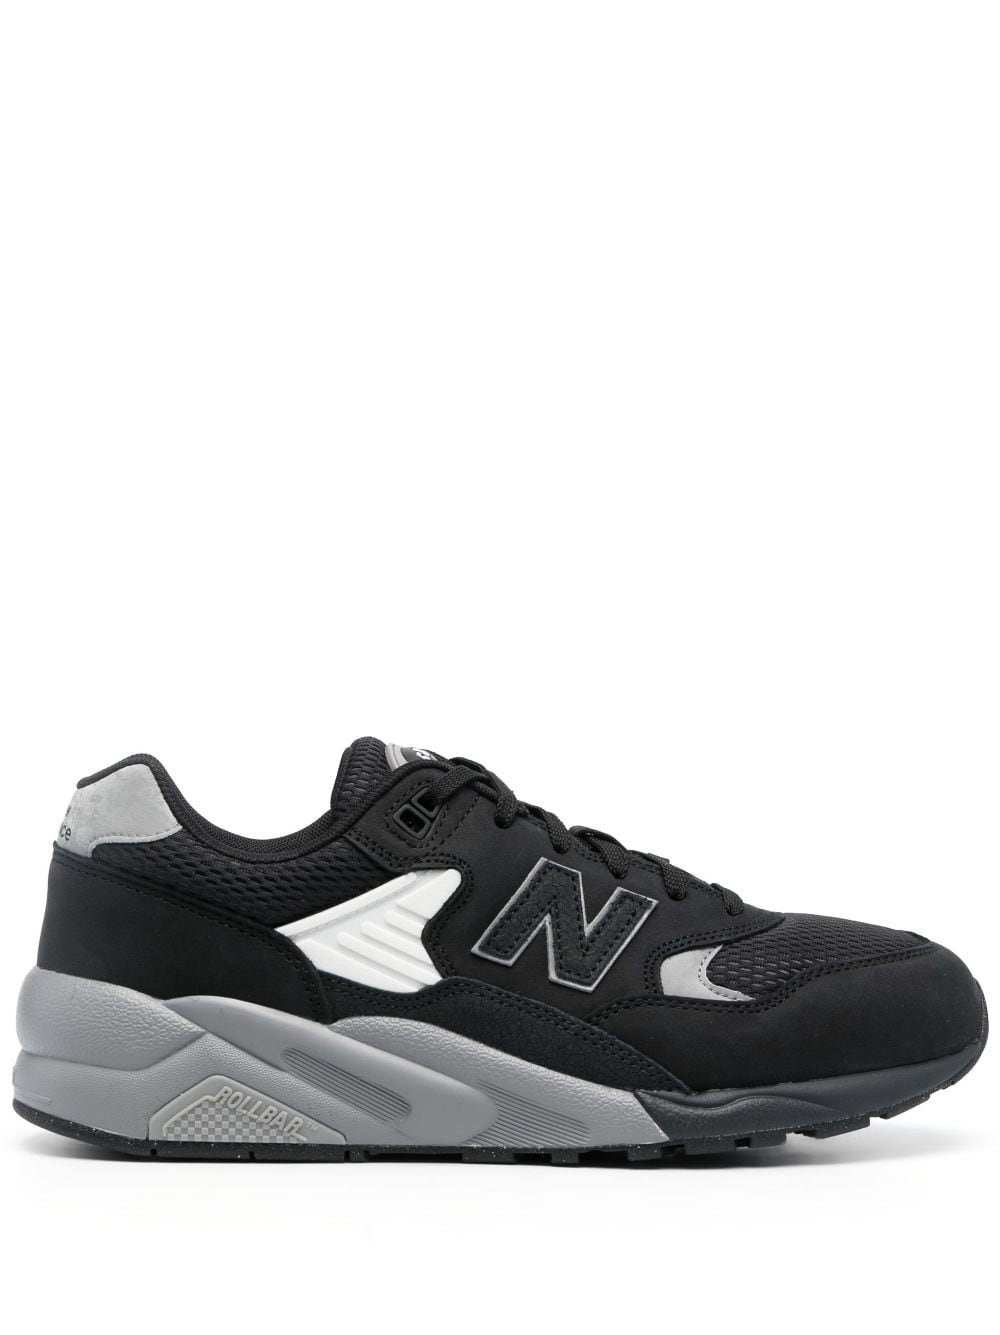 NEW BALANCE 580 LOW-TOP SNEAKERS